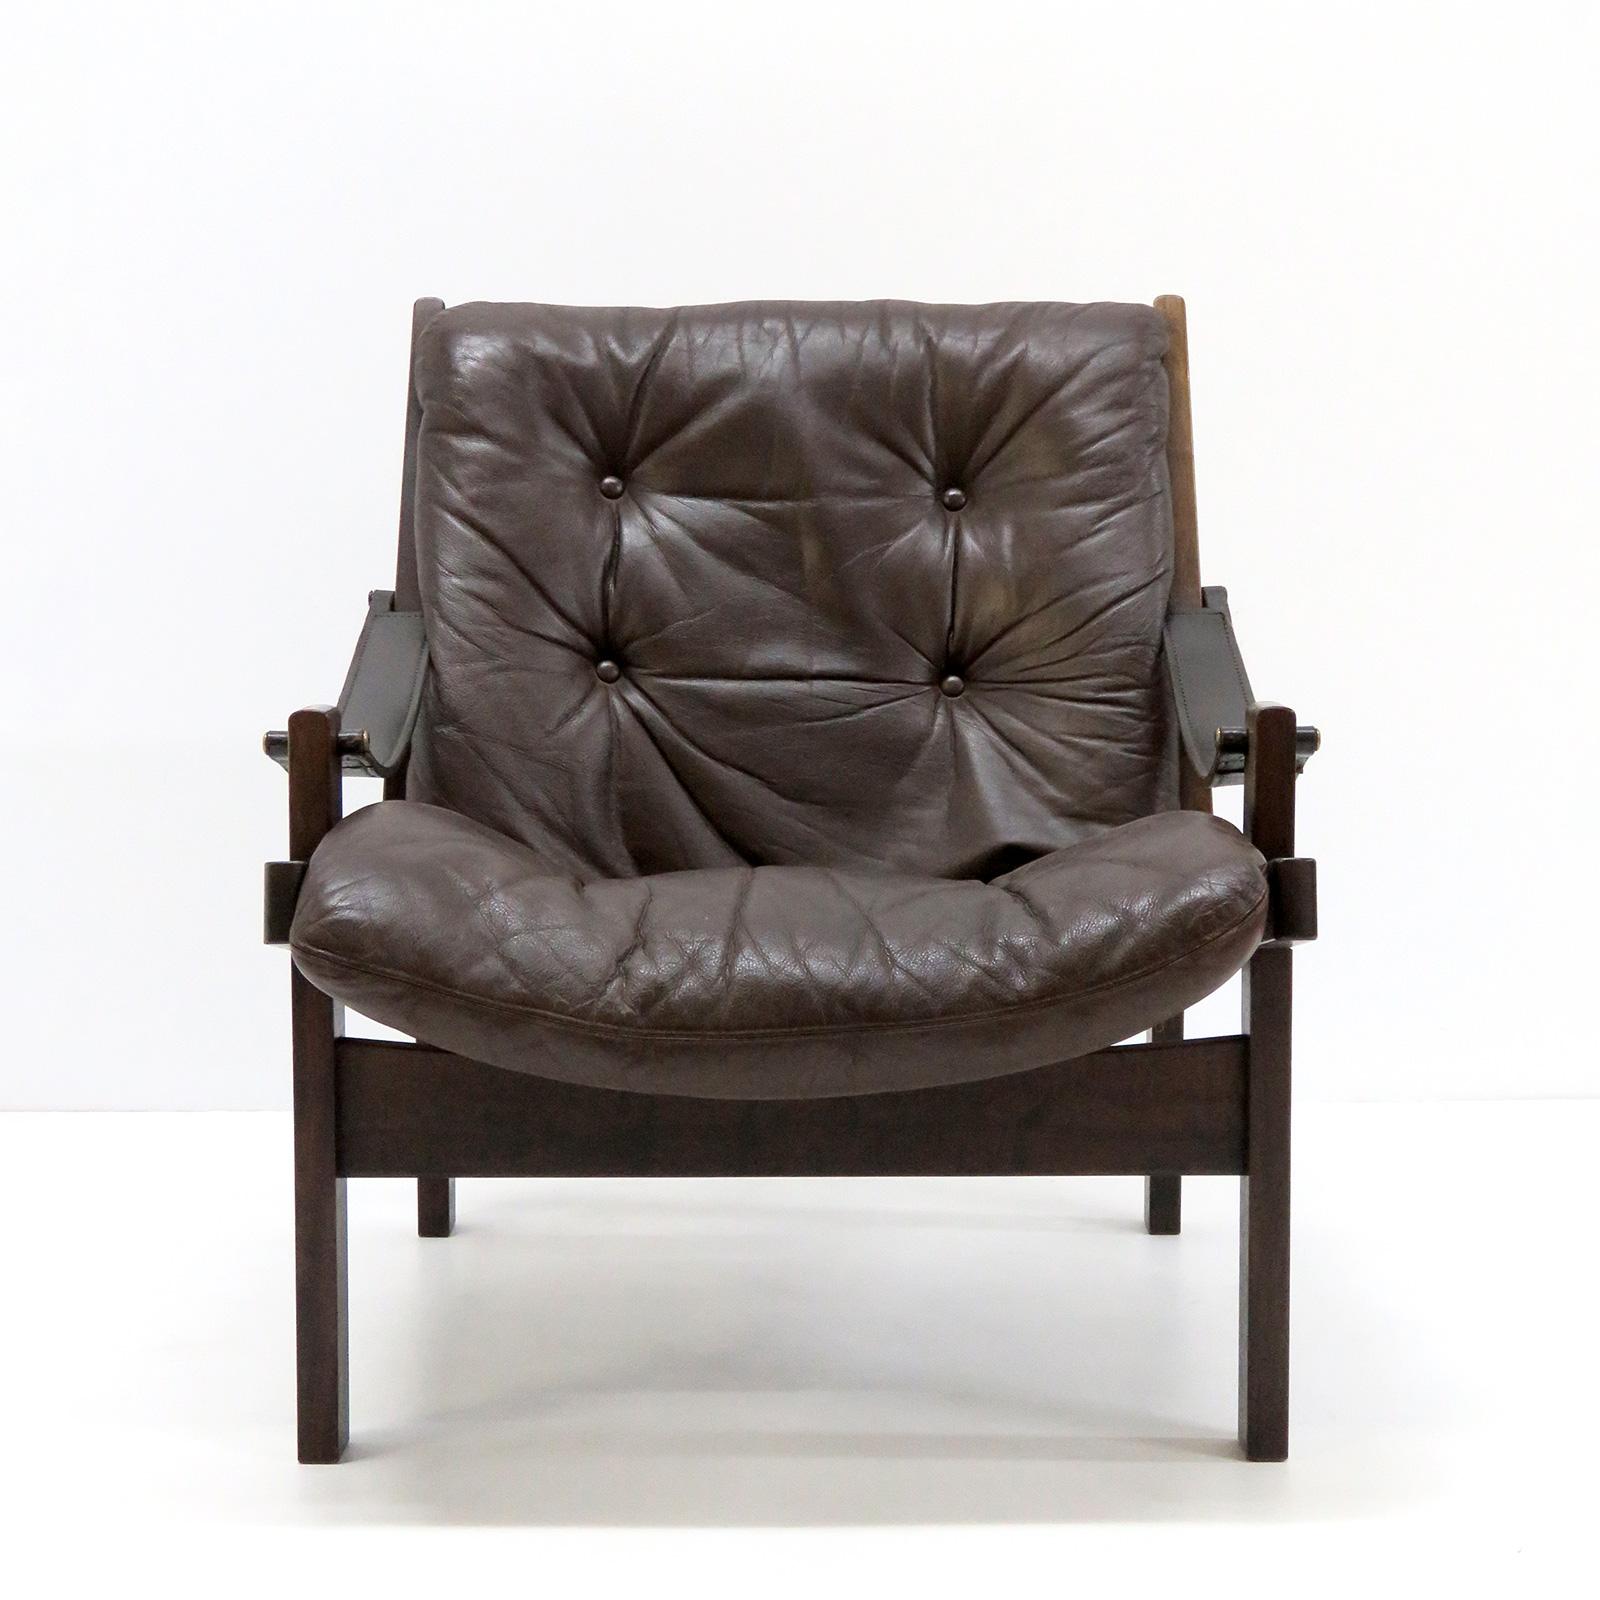 Stunning easy chairs with chocolate brown leather and stained hardwood frame designed in the 1960s by Torbjørn Afdal for Bruksbo, Norway. Sling armrests in leather, canvas weave holding the tufted leather cushion in place. Great vintage condition.